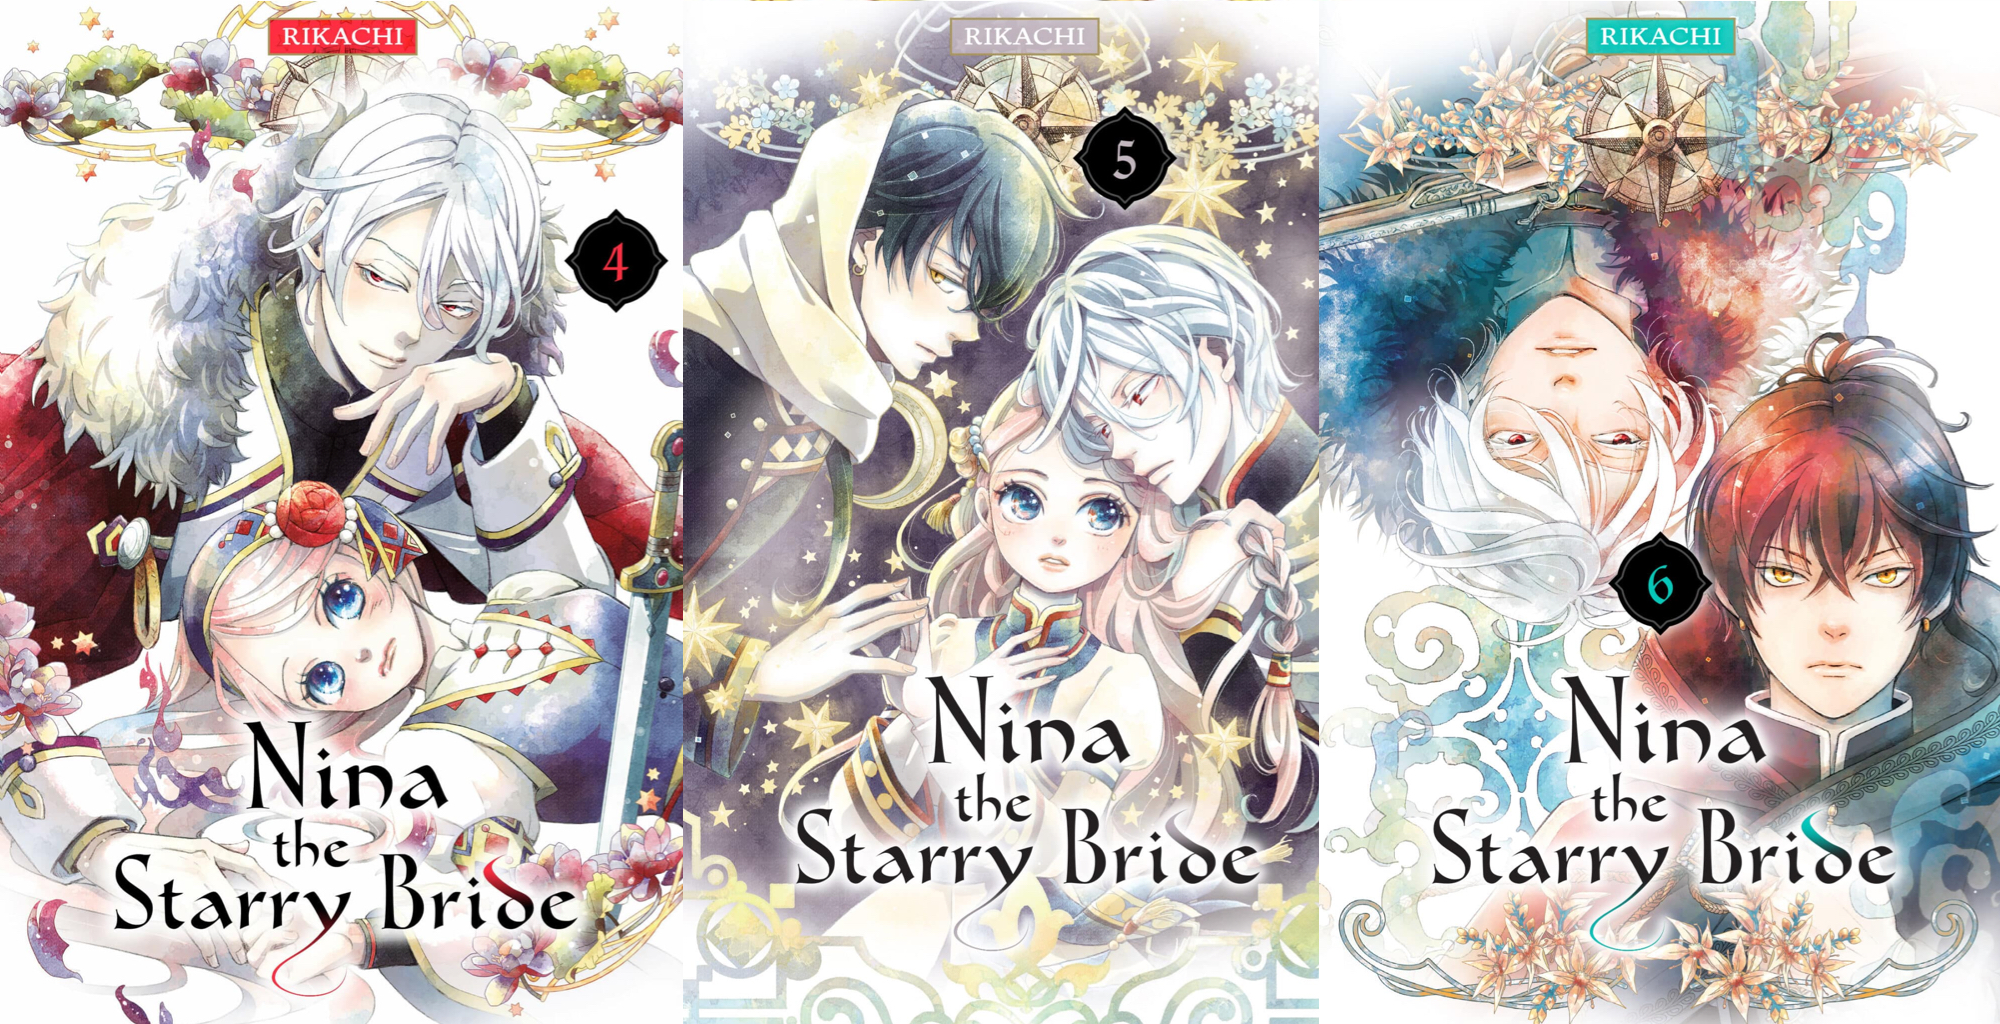 Nina the Starry Bride Volumes 4-6 Review